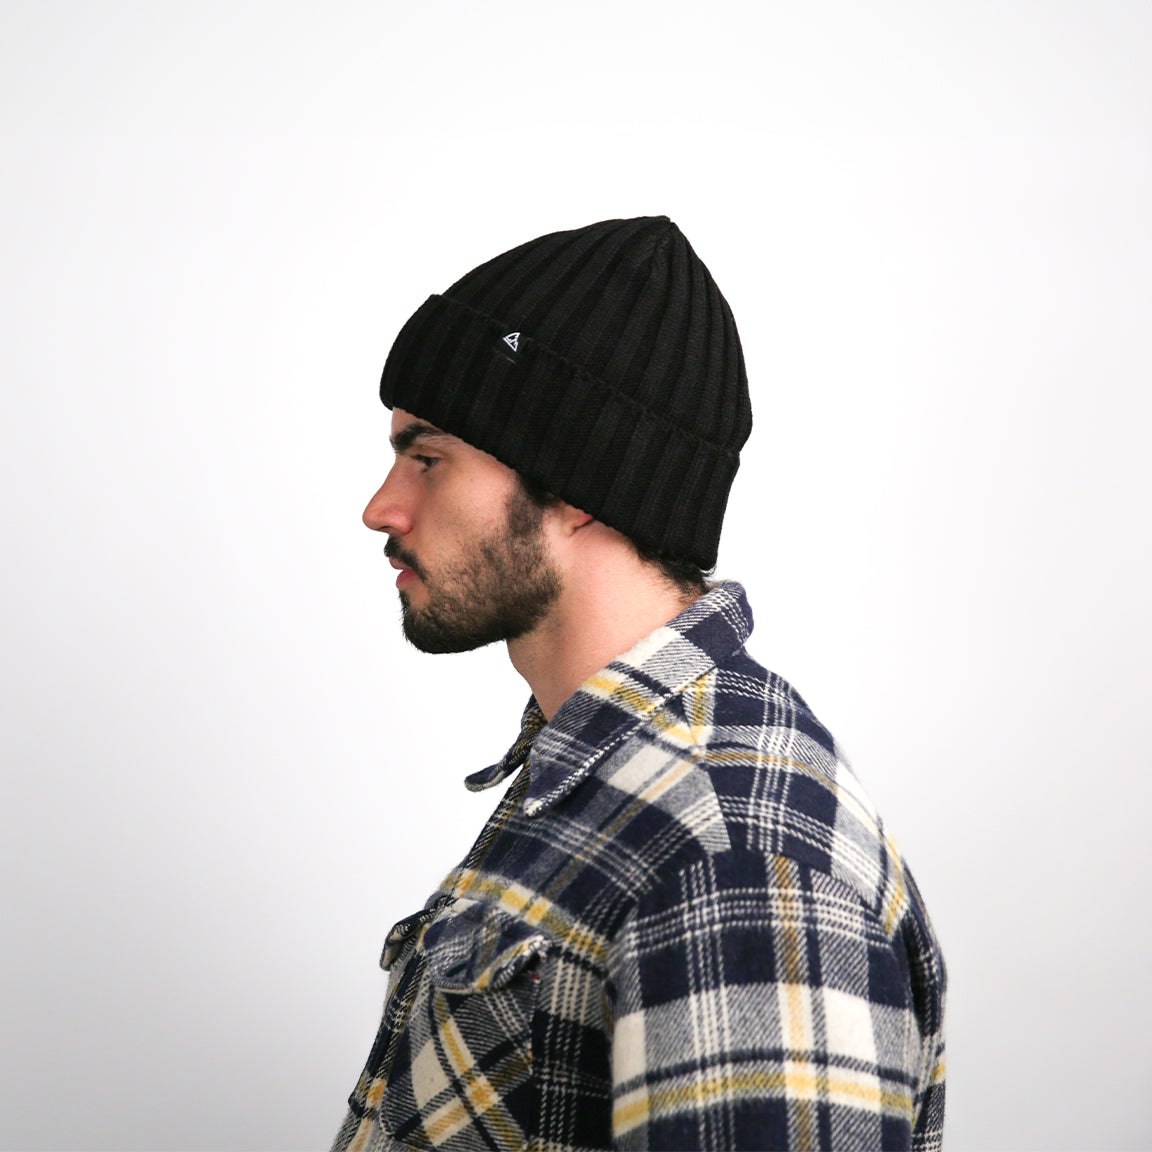 A side view of a person shows the profile of the black beanie, where the ribbed texture and the logo are visible. The beanie covers the ears and shapes to the head, ending with a slight rounded excess at the top, creating a comfortable fit. The plaid shirt's pattern is also visible from this angle.